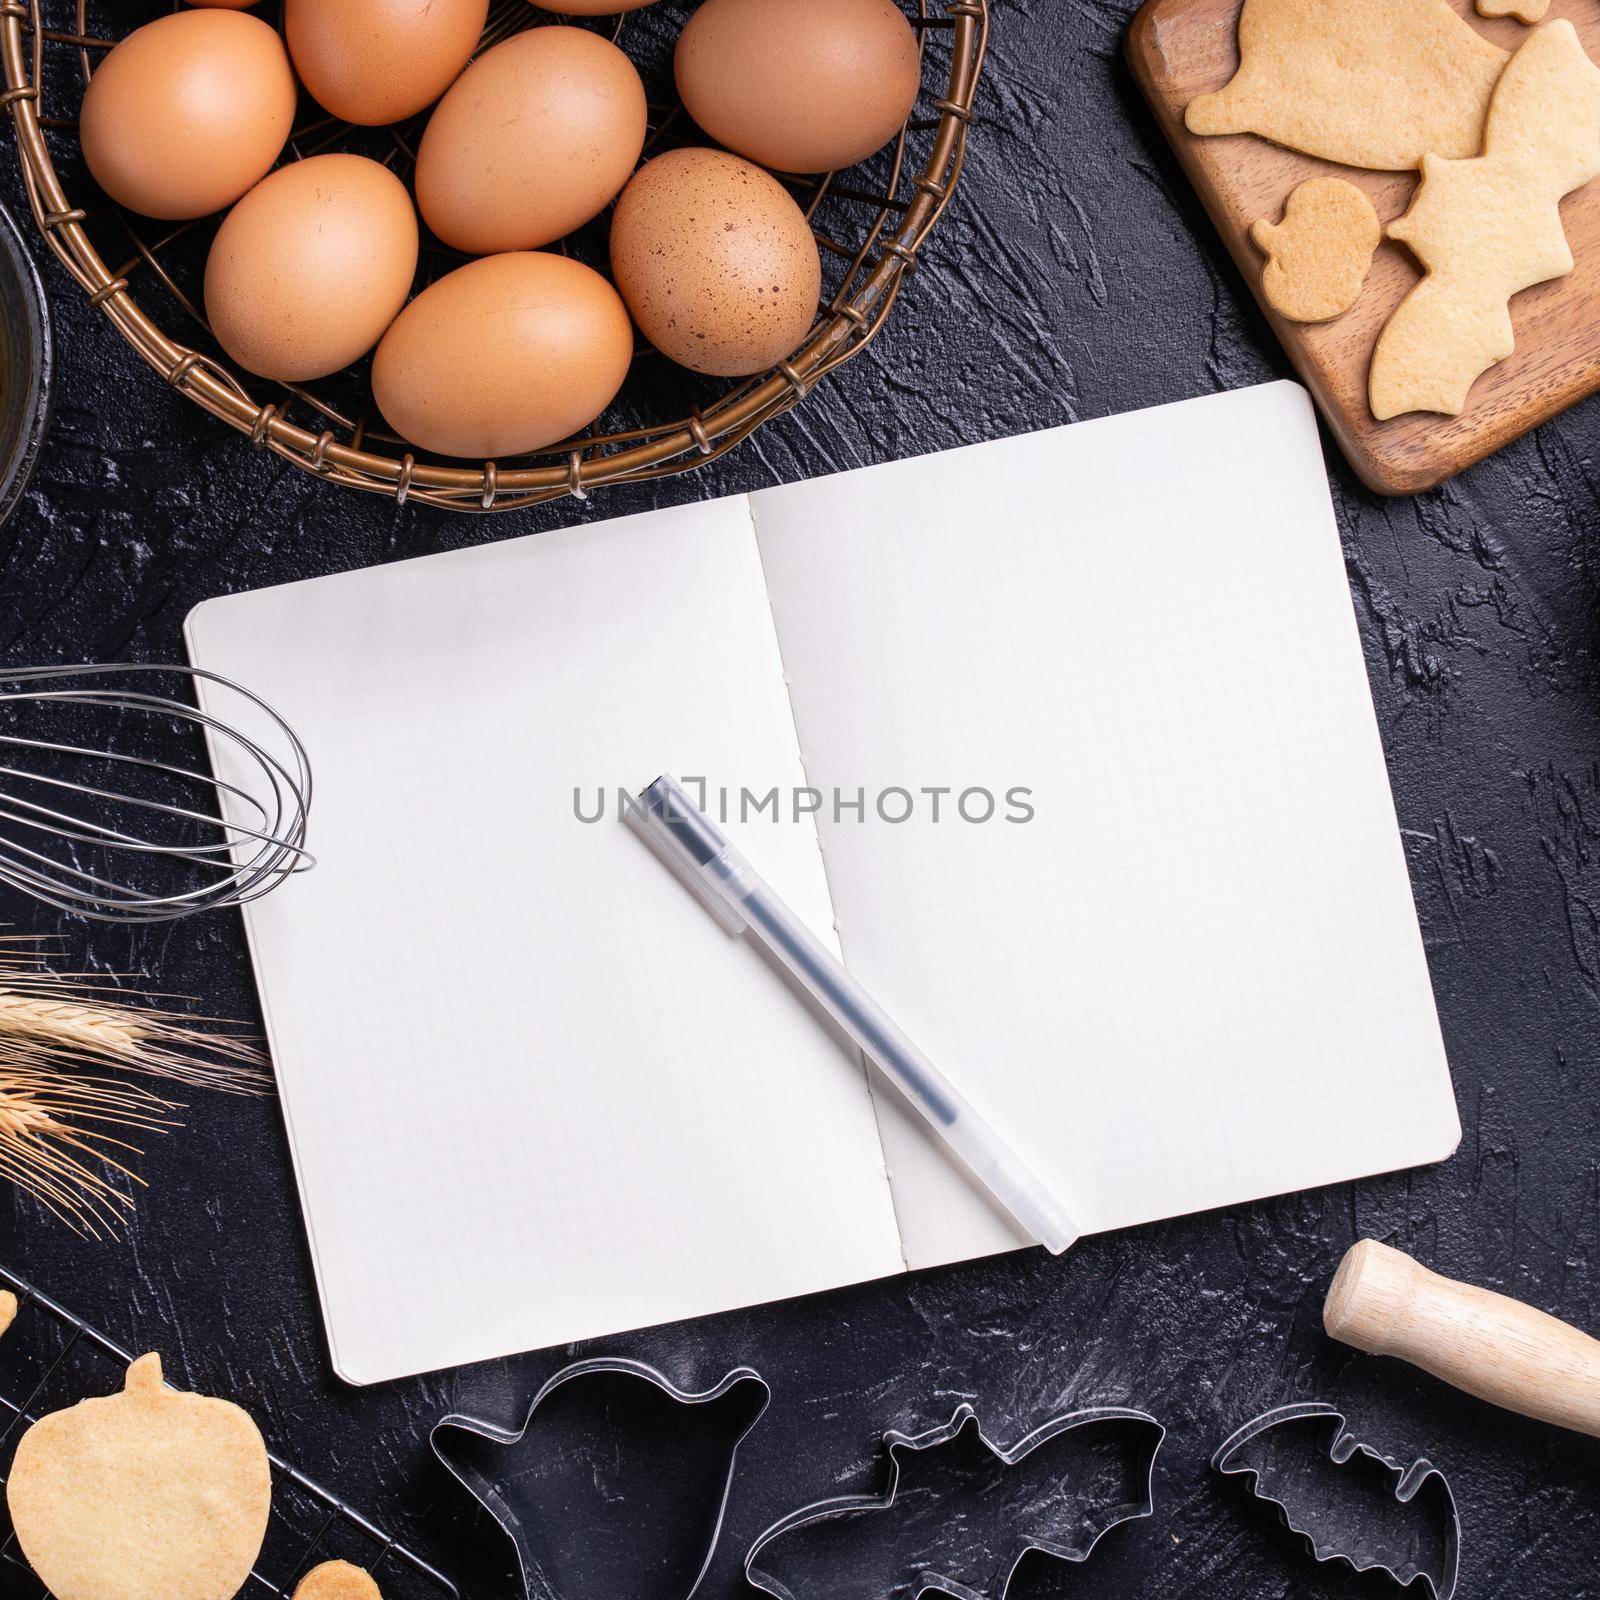 Making cookies cookbook recipe design concept, baking ingredients preparation layout with notebook, top view, flat lay, overhead, mockup copy space.